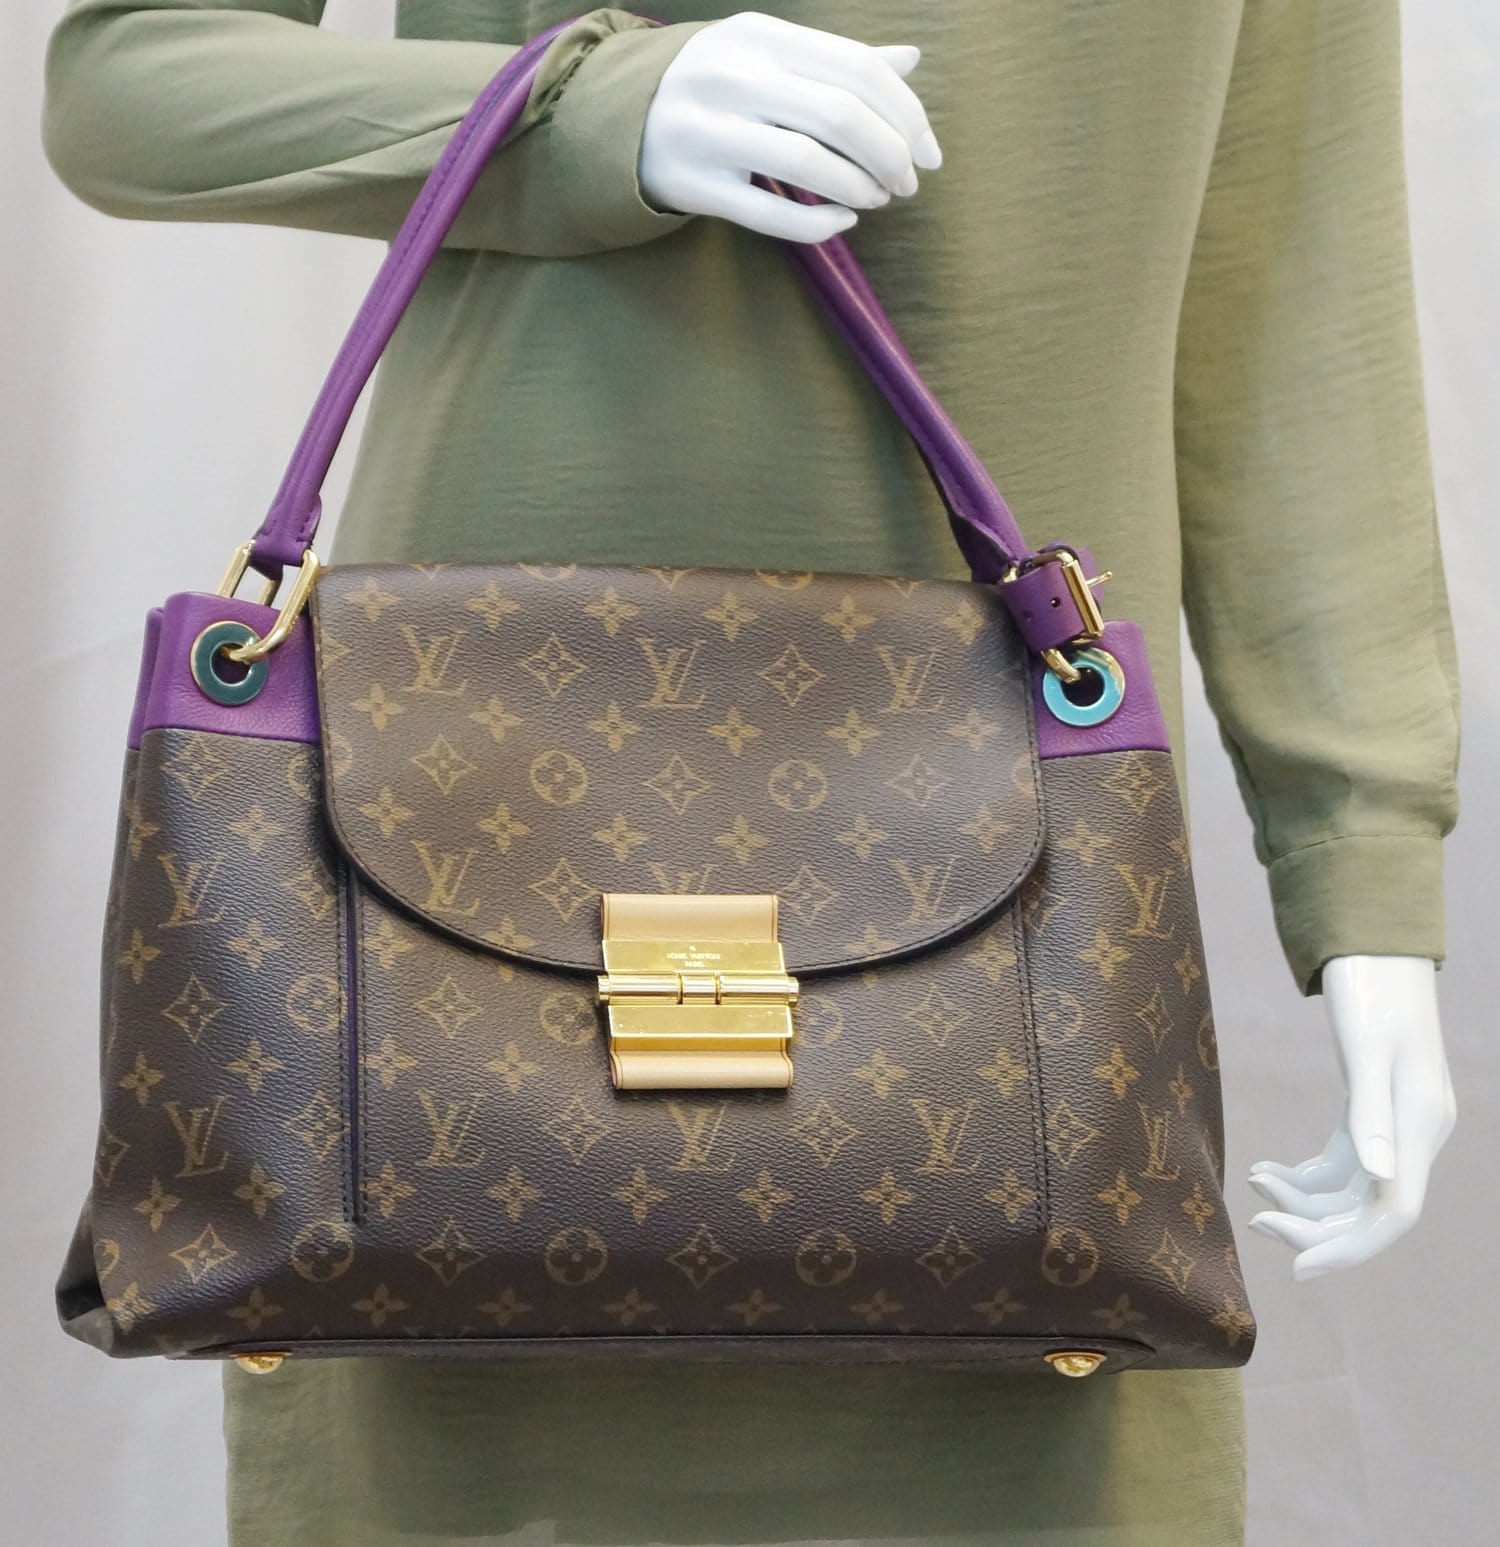 Louis Vuitton Duffle Bags - 95 For Sale on 1stDibs  lv duffle bag, fake louis  vuitton duffle bag, louis vuitton gym bag price